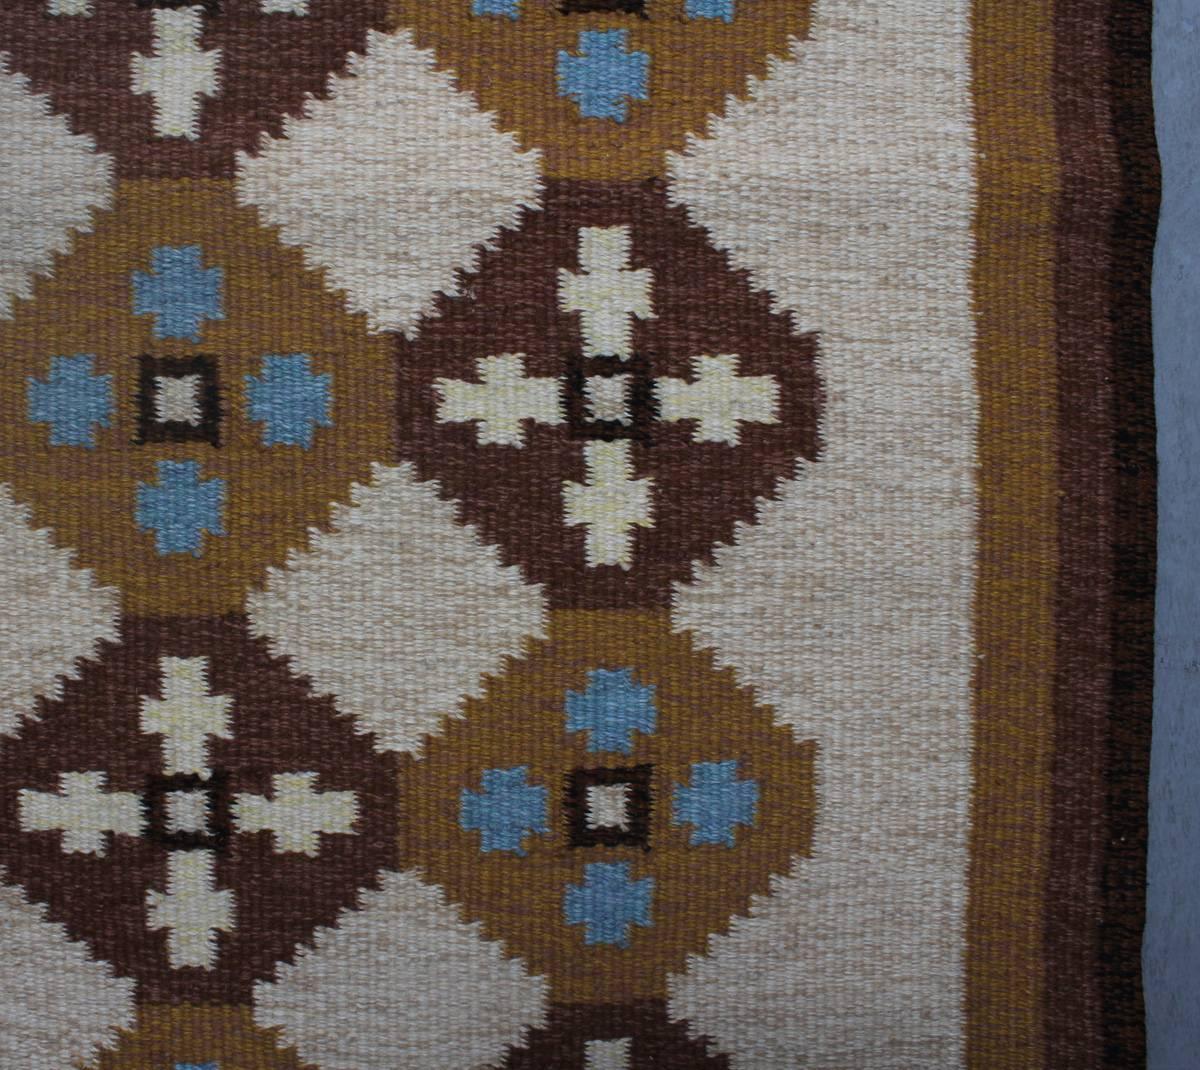 Swedish Rölakan rug in tones of brown, cream and blue. The rug designed by A Wallberg, signed AW, circa 1960s-1970s.